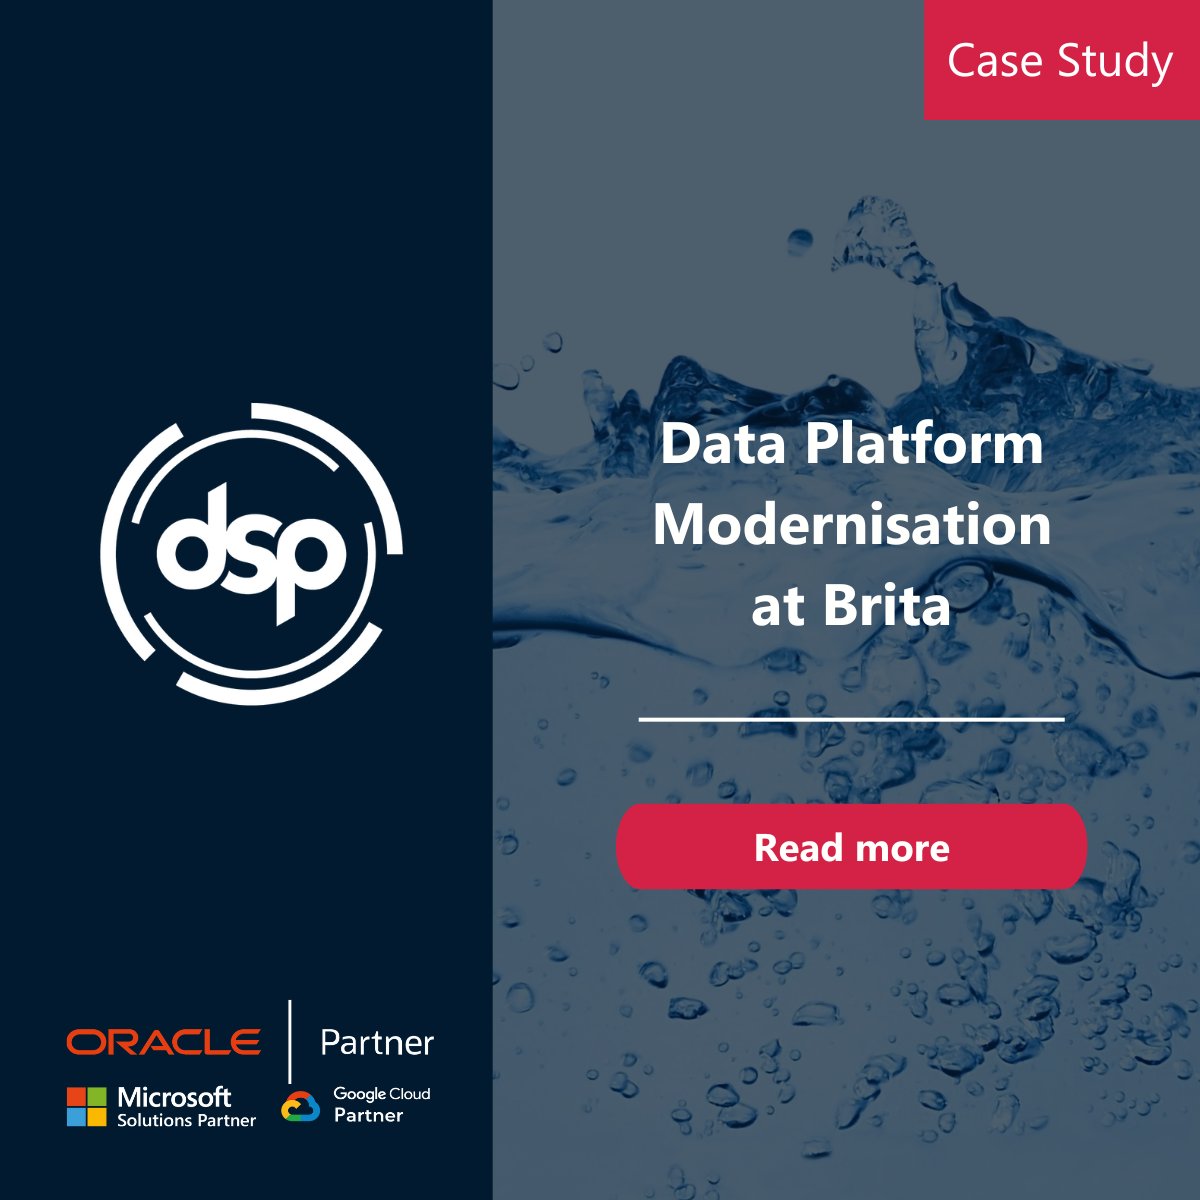 Learn how DSP married technological knowledge with commercial understanding to identify substantial cost savings for Brita and simplify a complex Microsoft estate. Read more here: bit.ly/3vvtfU8 #manufacturing #microsoft #dataplatform